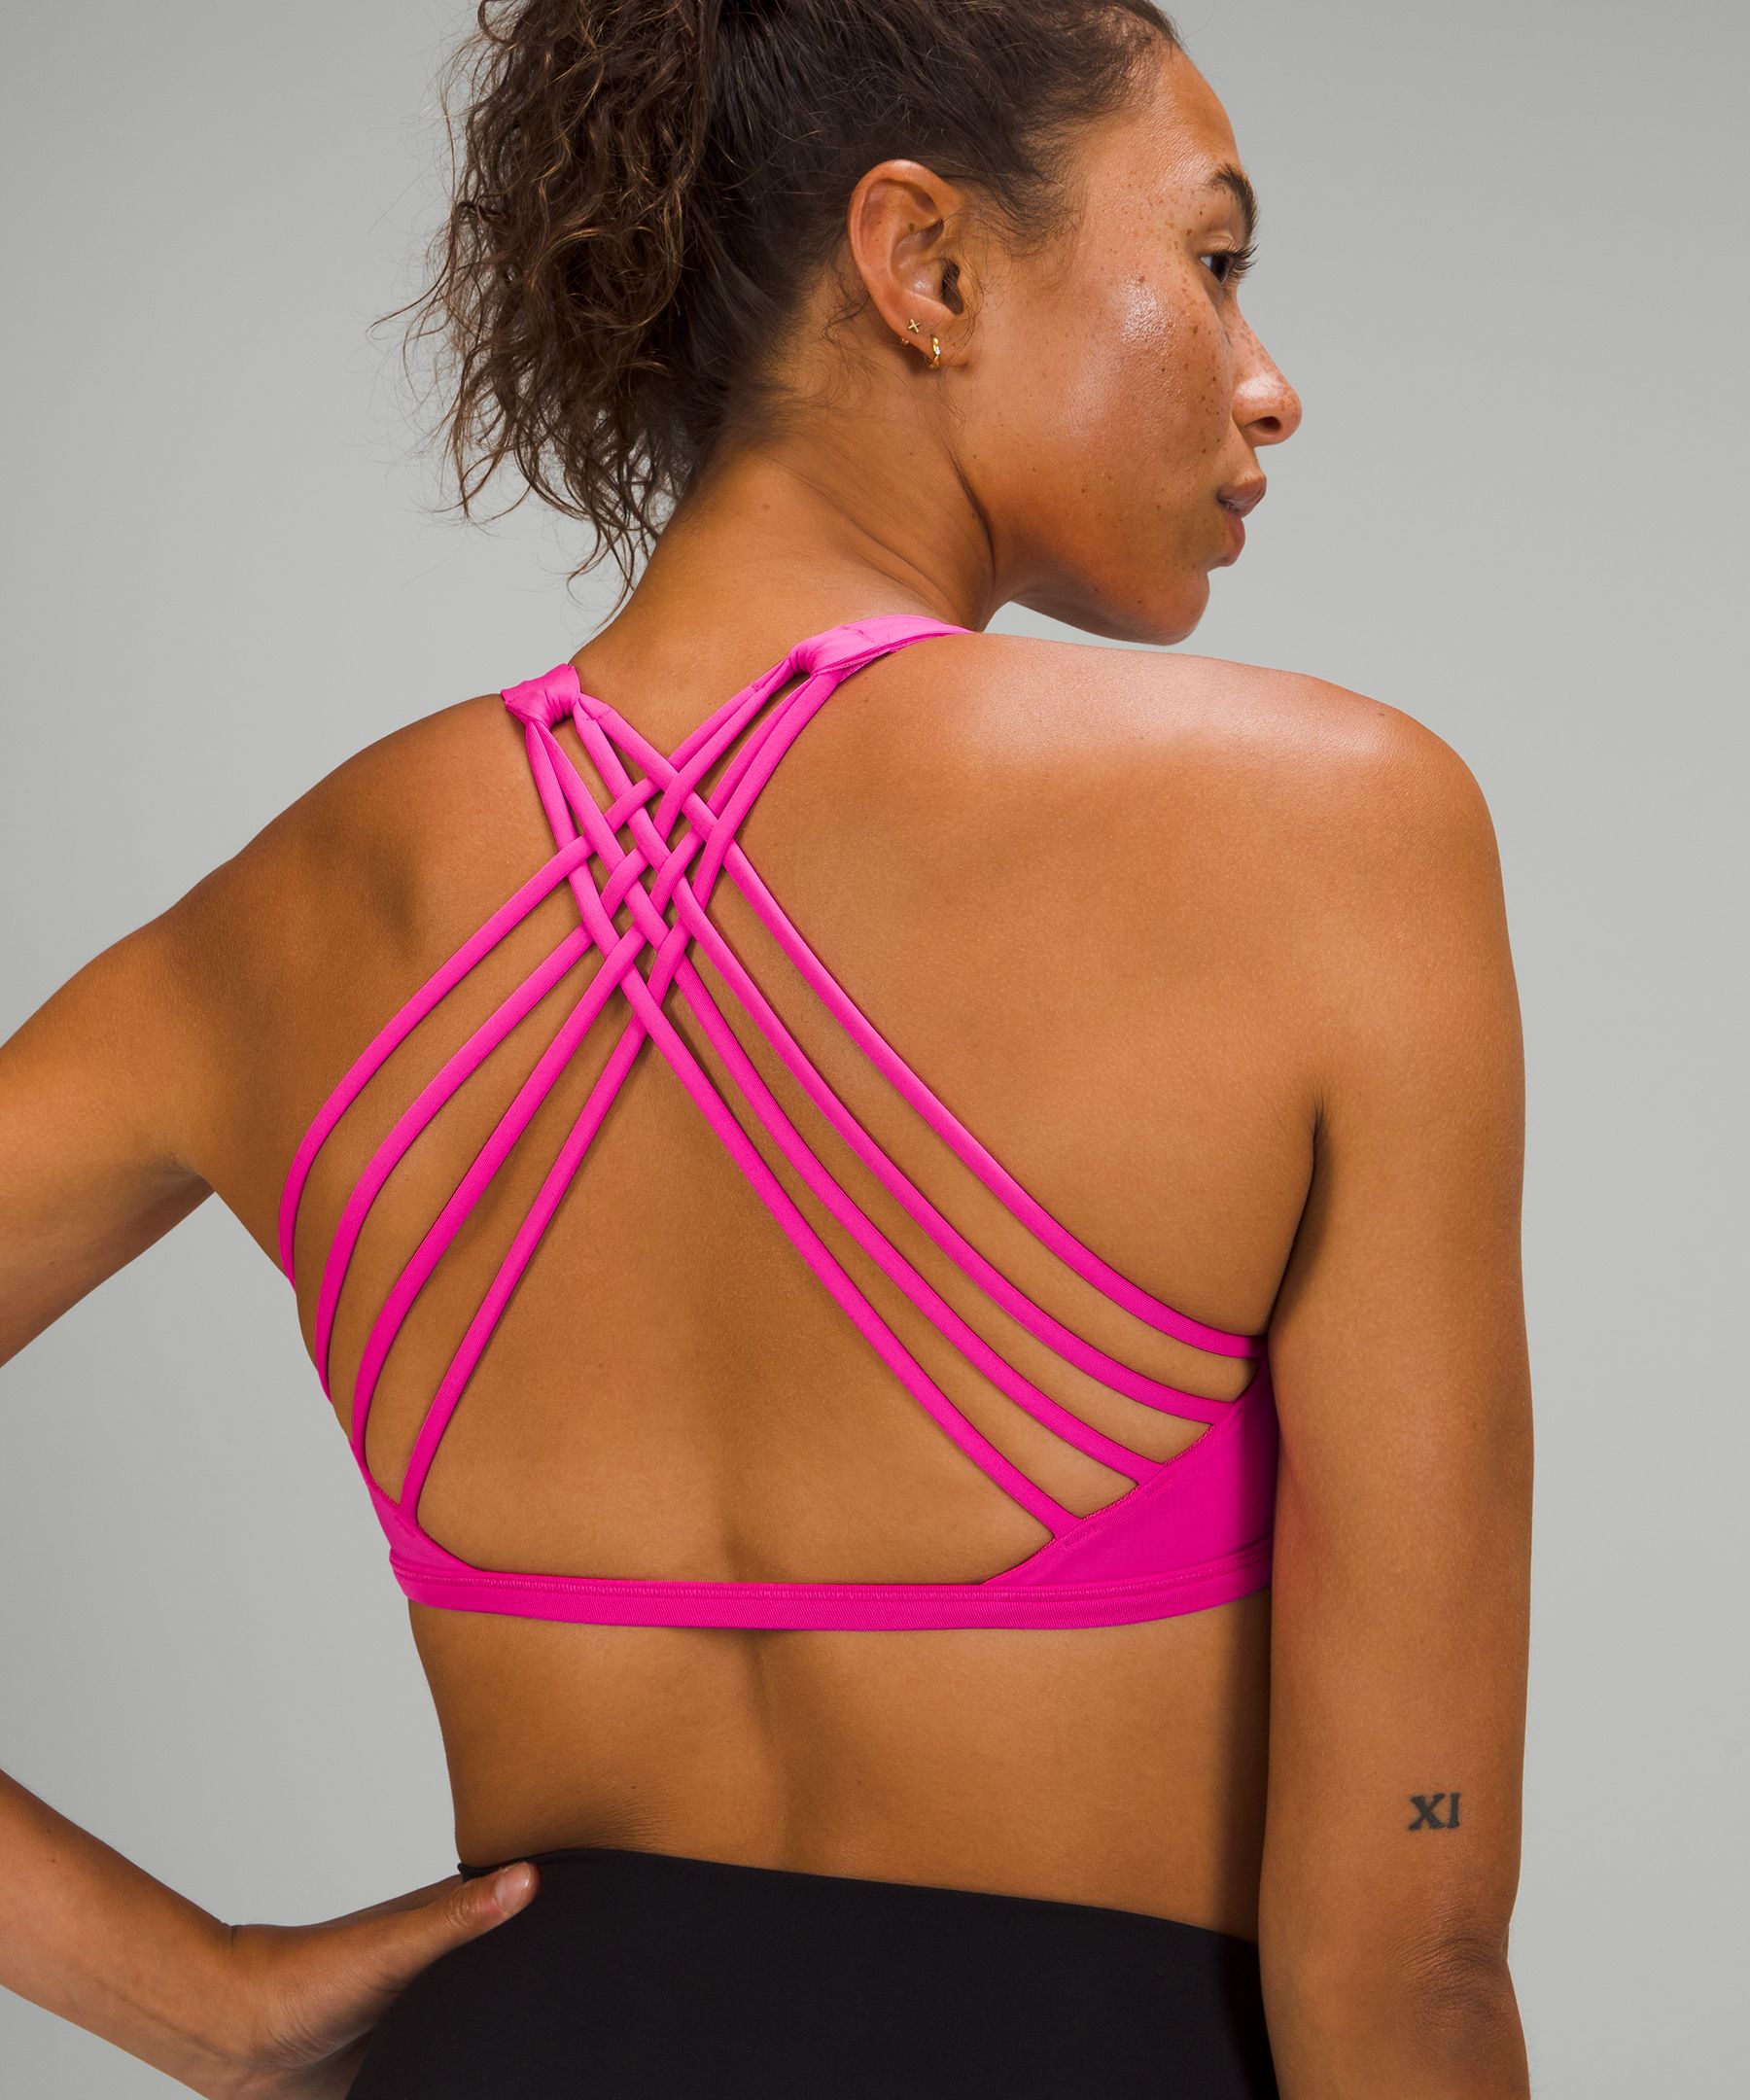 Lululemon Free to Be Bra - Wild *Light Support, A/B Cup - Roasted